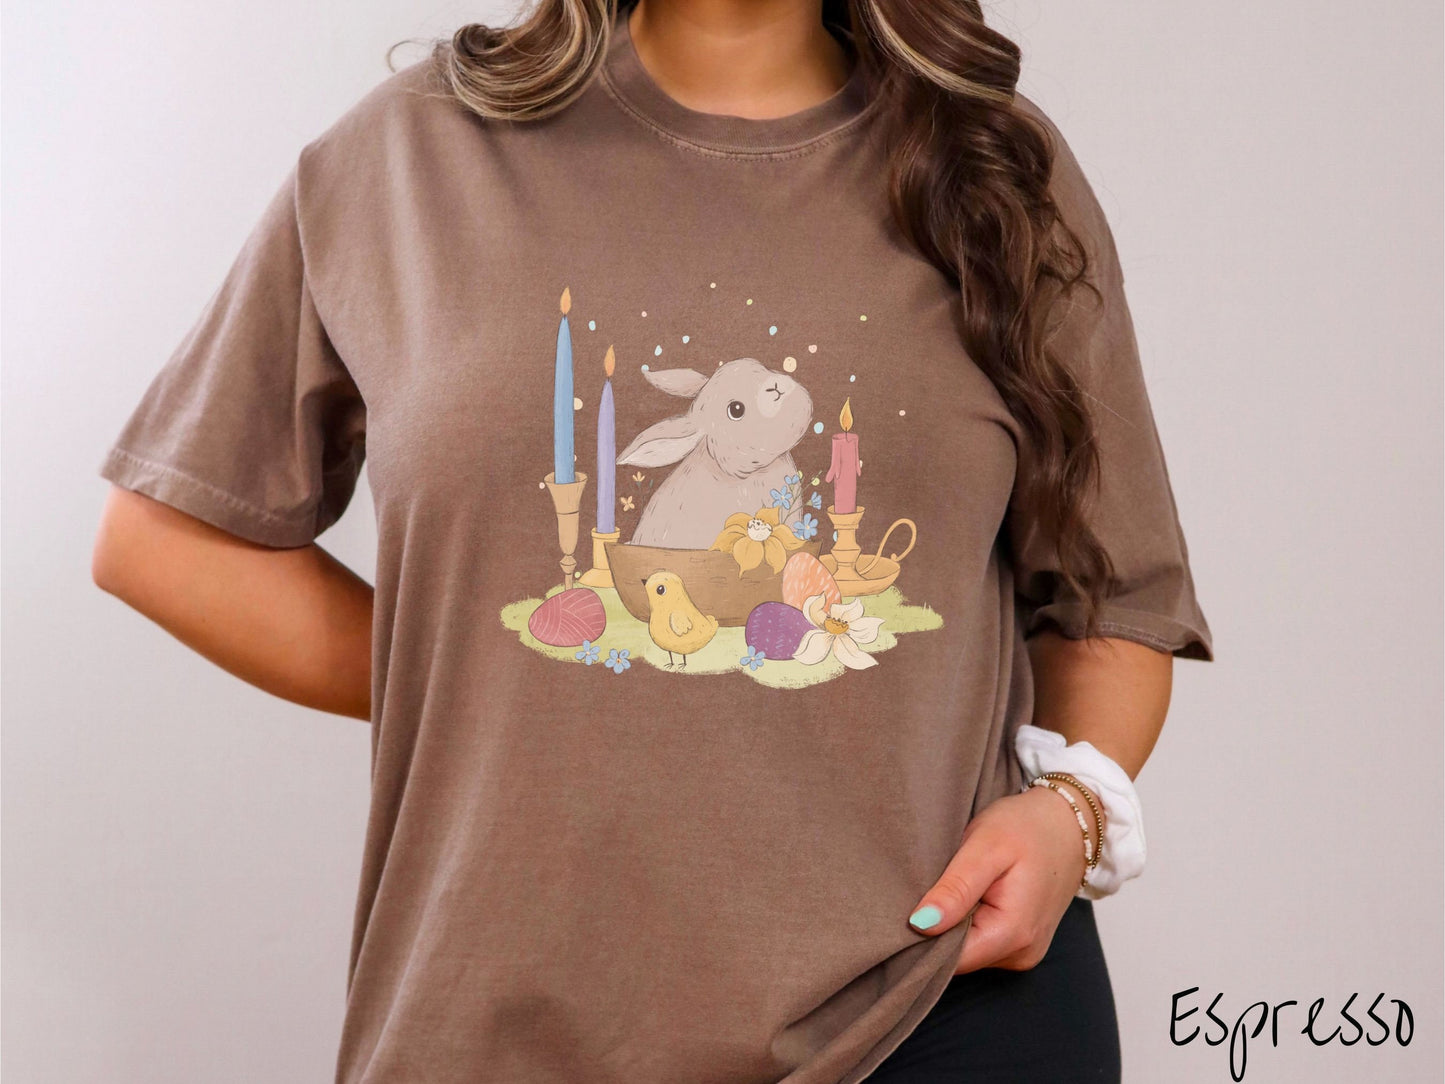 A woman wearing a cute, vintage espresso colored shirt with a gray bunny rabbit sitting in between three lit candles, some red, orange, and purple eggs, and yellow and white flowers.